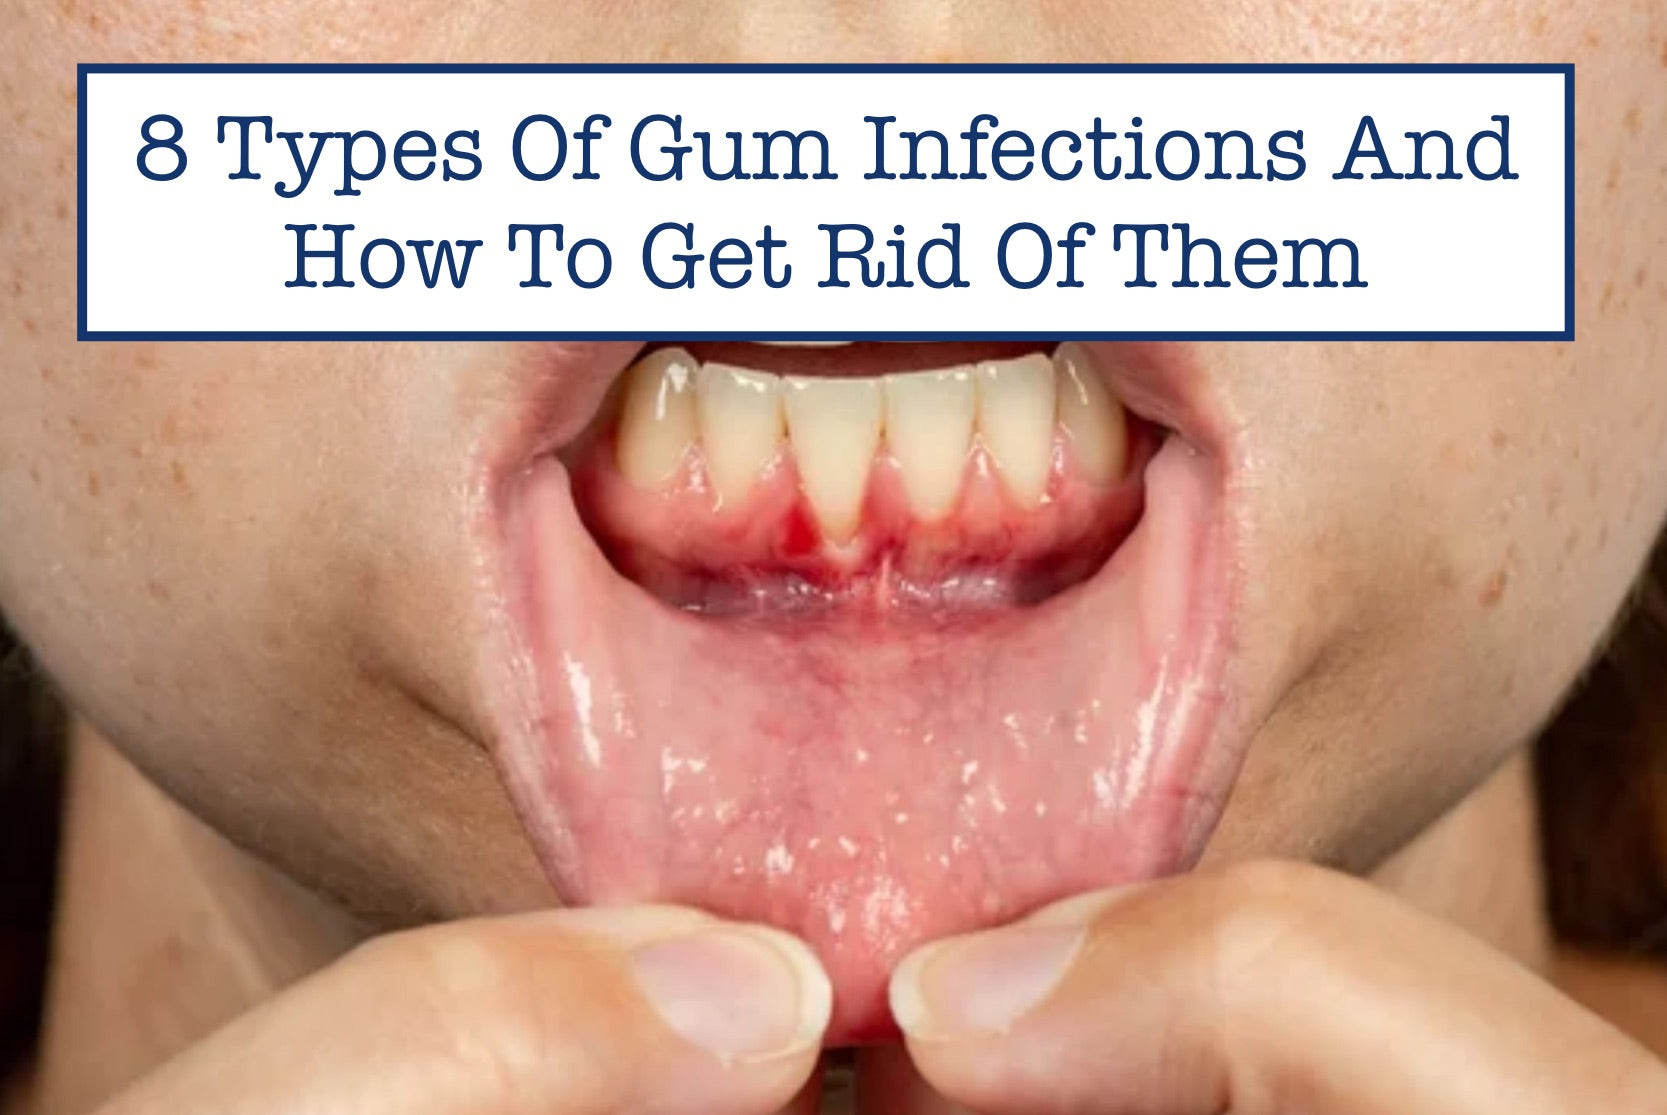 8 Types Of Gum Infections And How To Get Rid Of Them